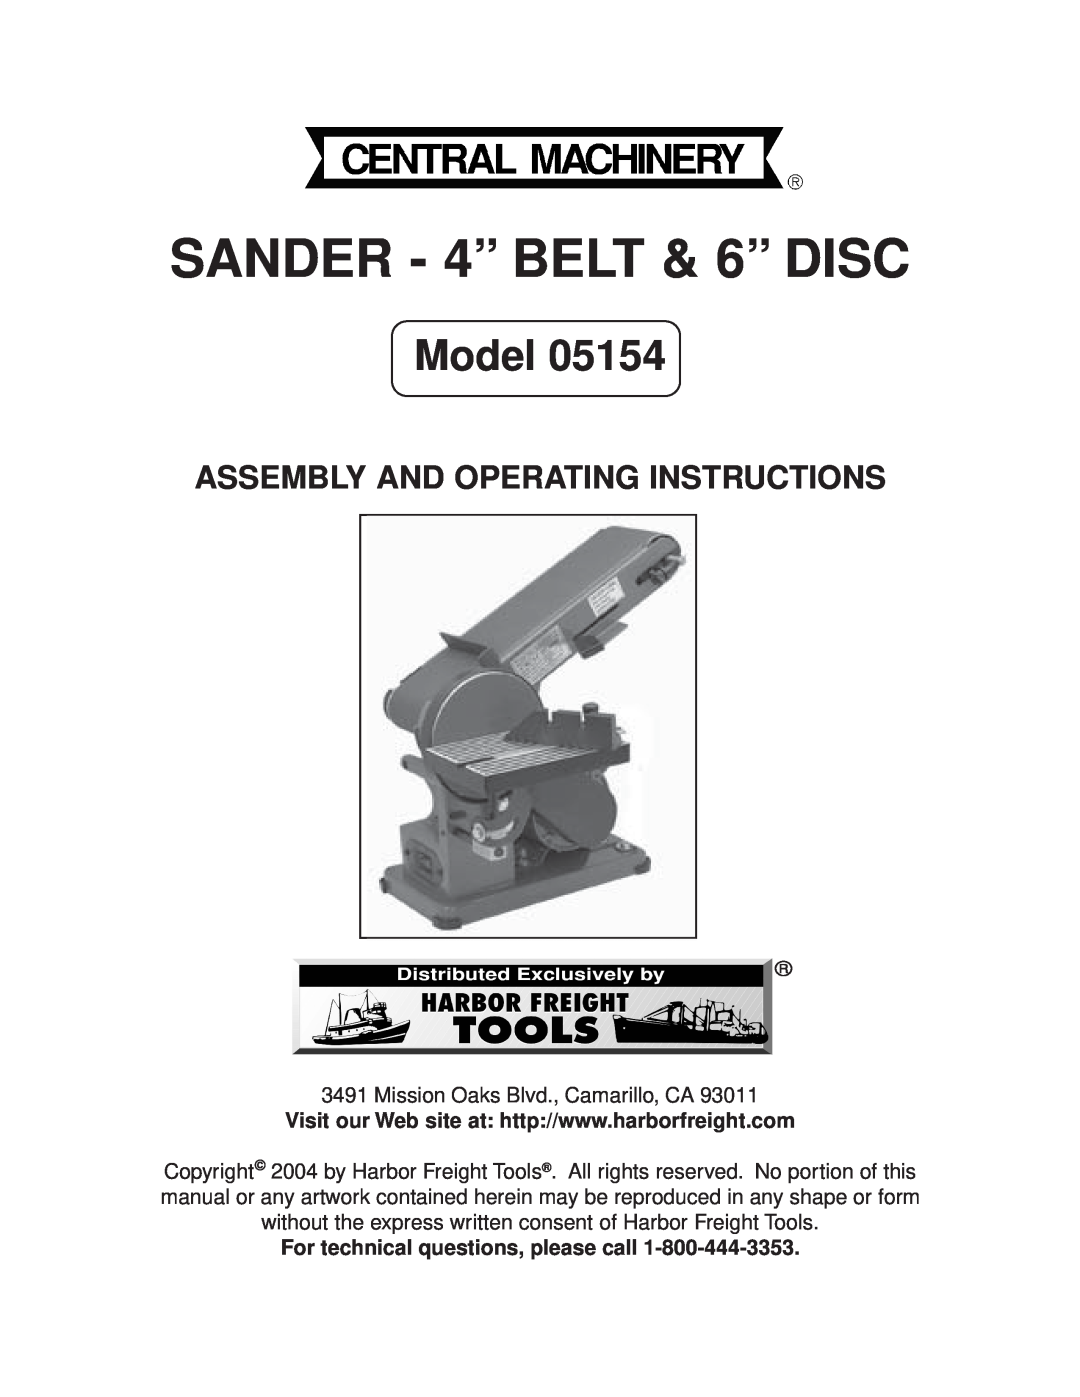 Harbor Freight Tools 05154 operating instructions Model, For technical questions, please call, SANDER - 4” BELT & 6” DISC 